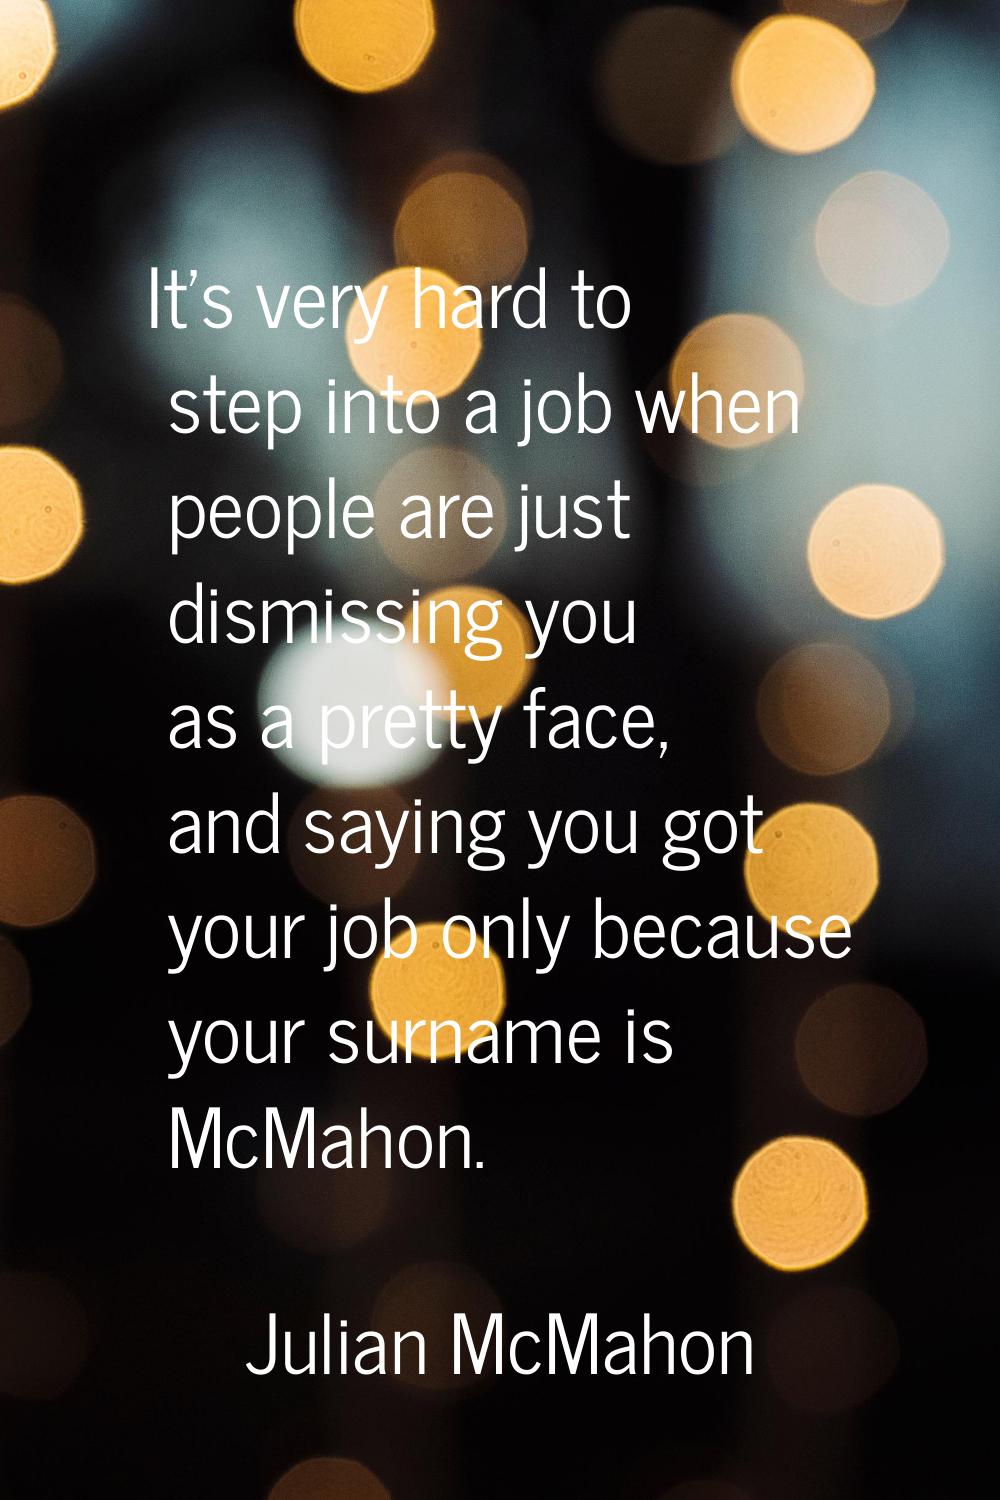 It's very hard to step into a job when people are just dismissing you as a pretty face, and saying 